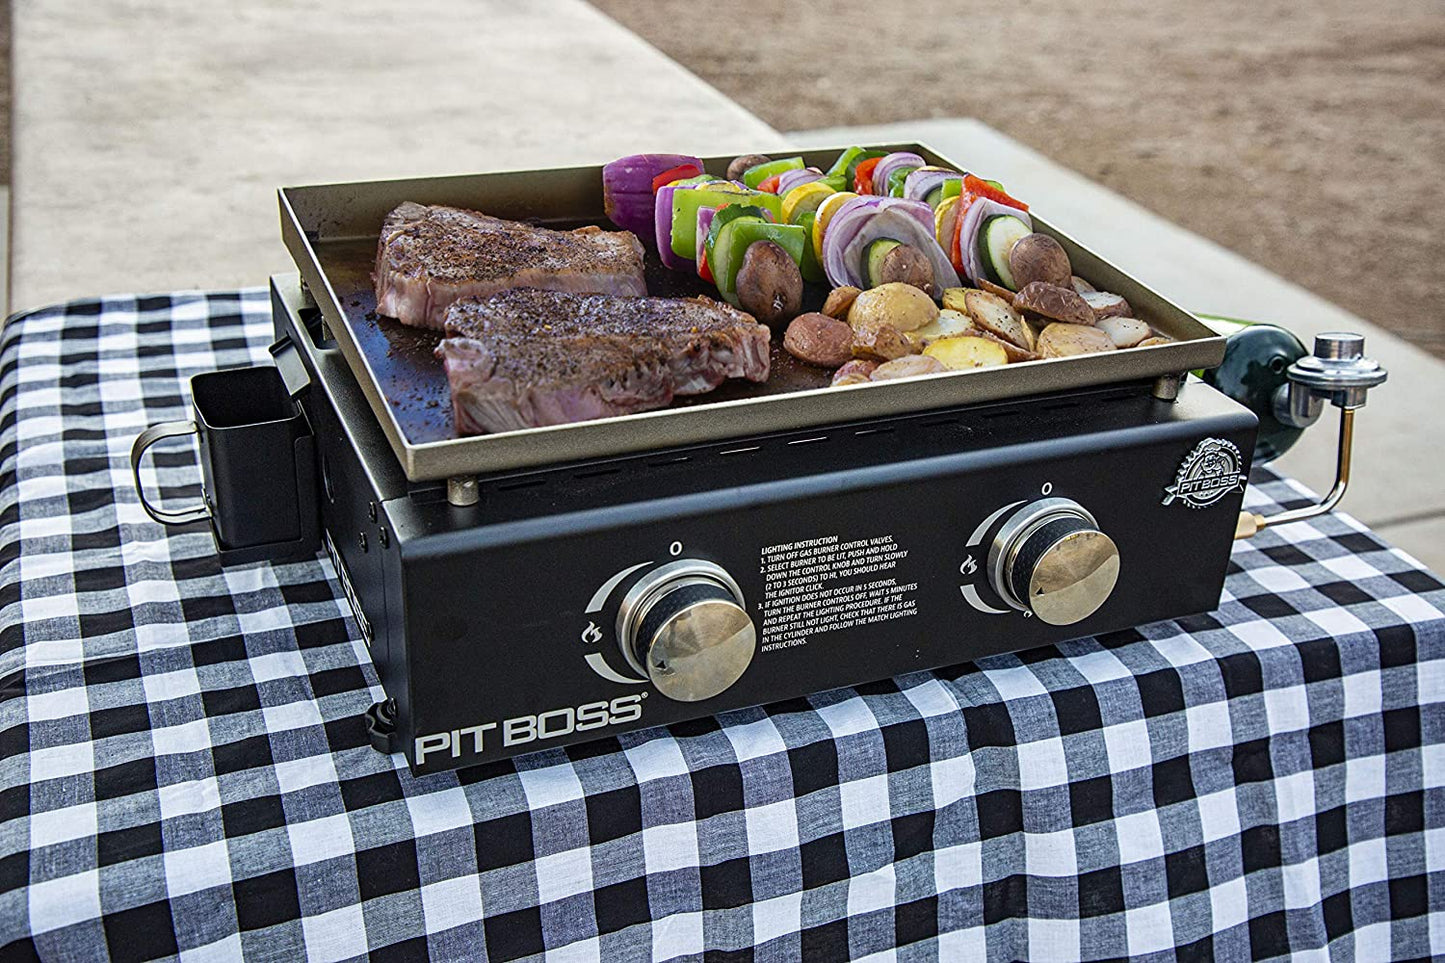 PIT BOSS PB336GS Two Burner Portable Flat Top Griddle - Cover Included